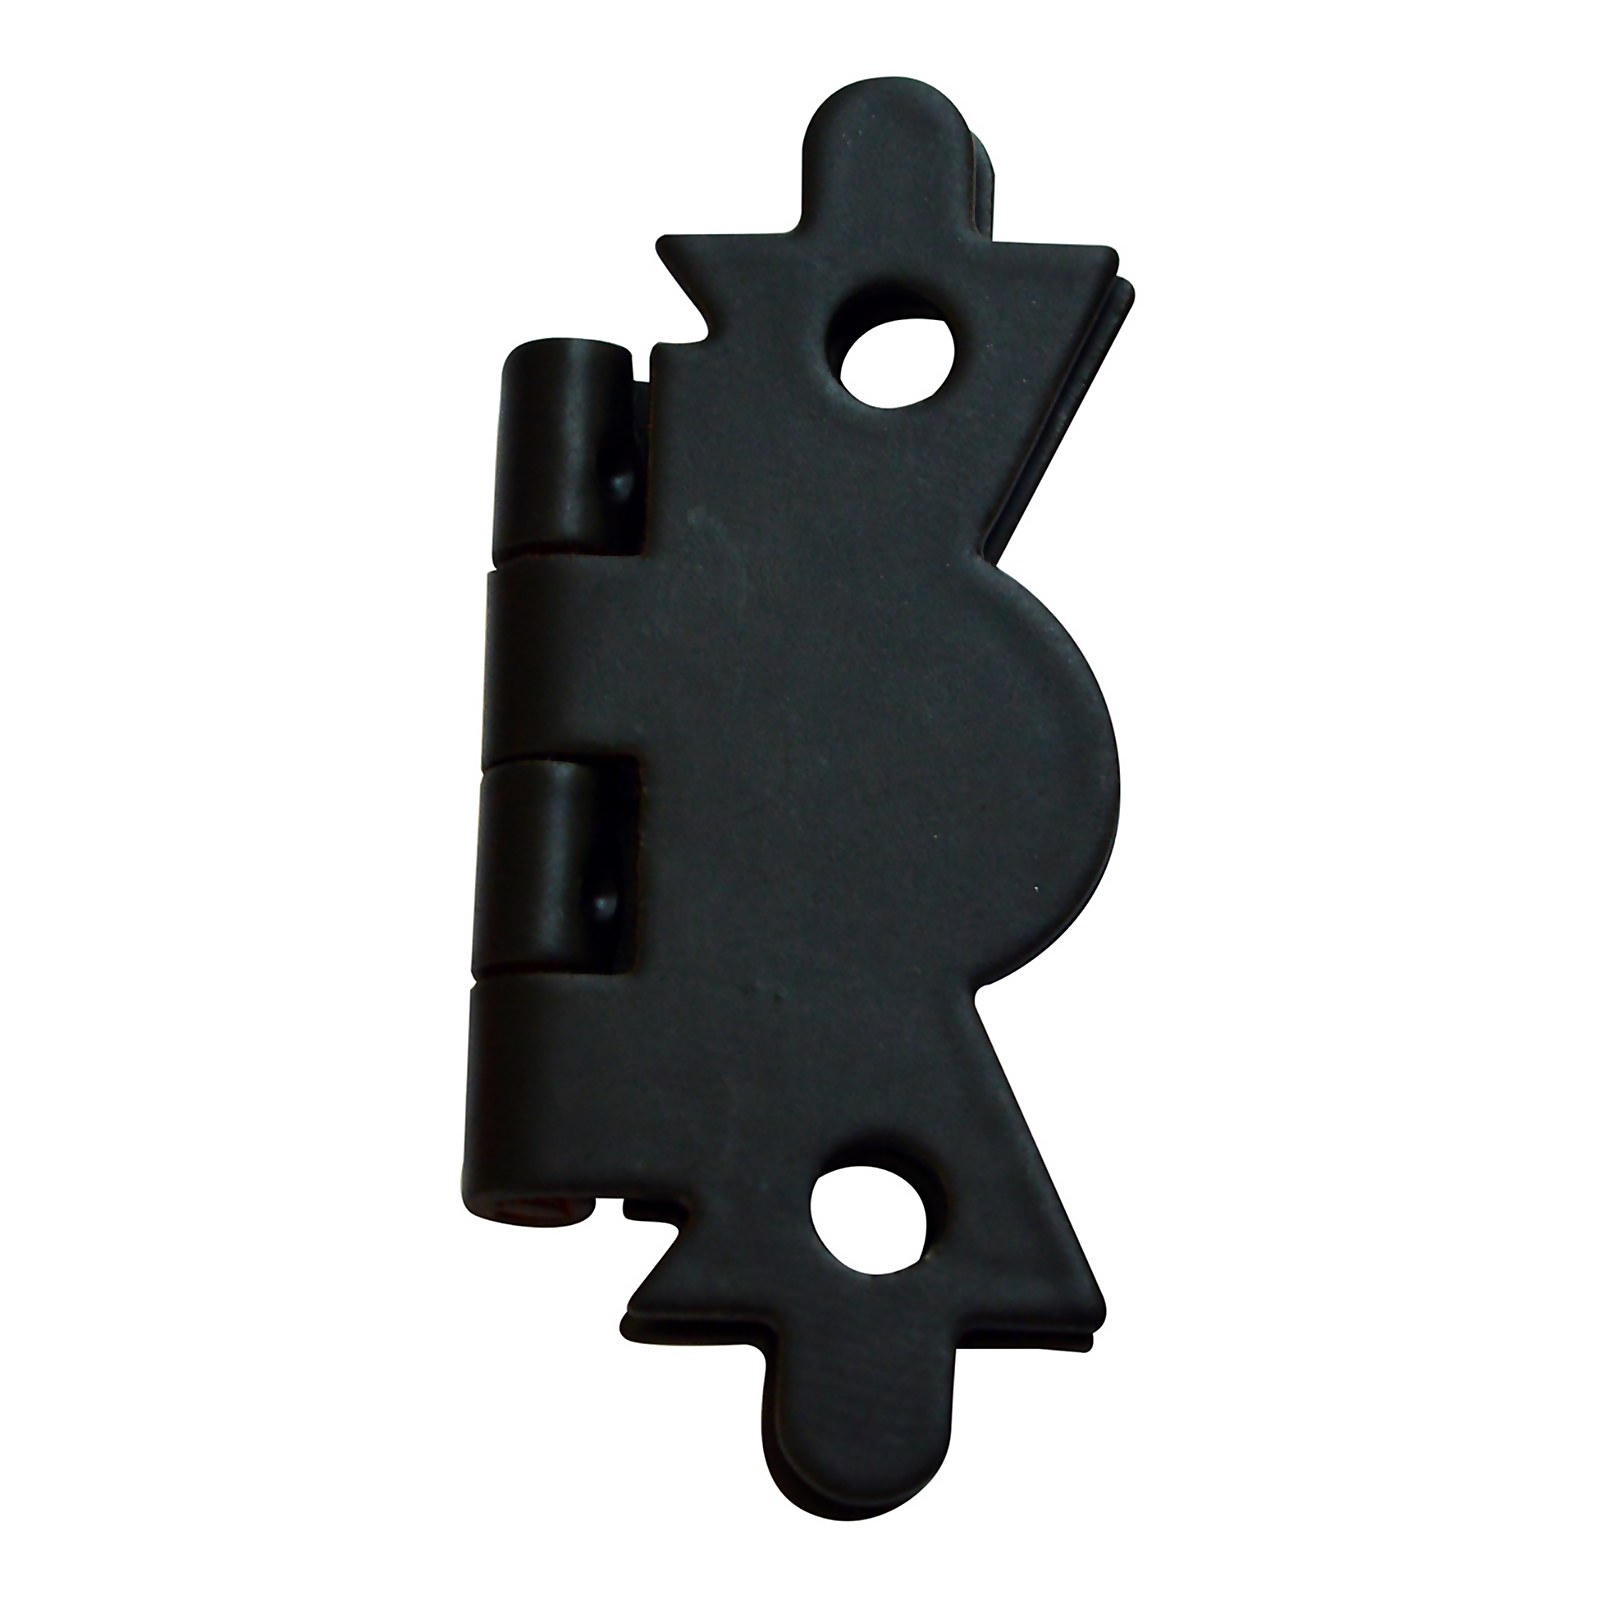 Photo of Butterfly Hinge 50mm Black - 2 Pack